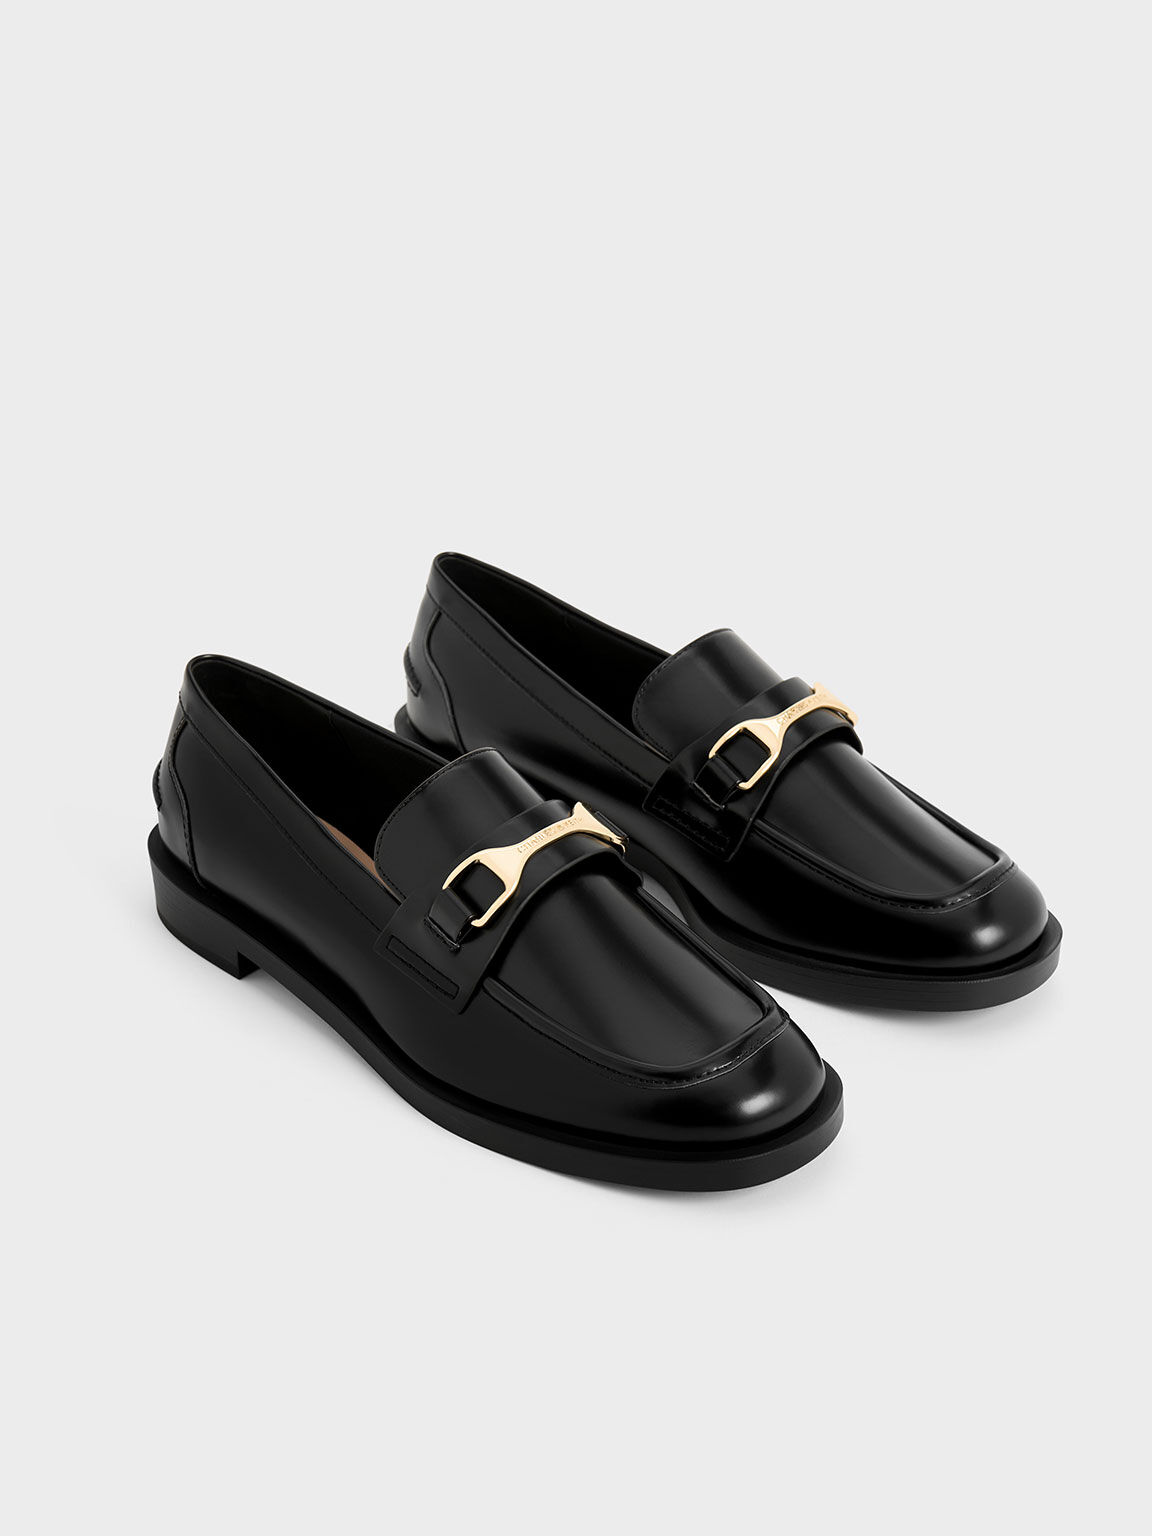 melt the lady square loafer 36 アウトレット 通販 専門 店 